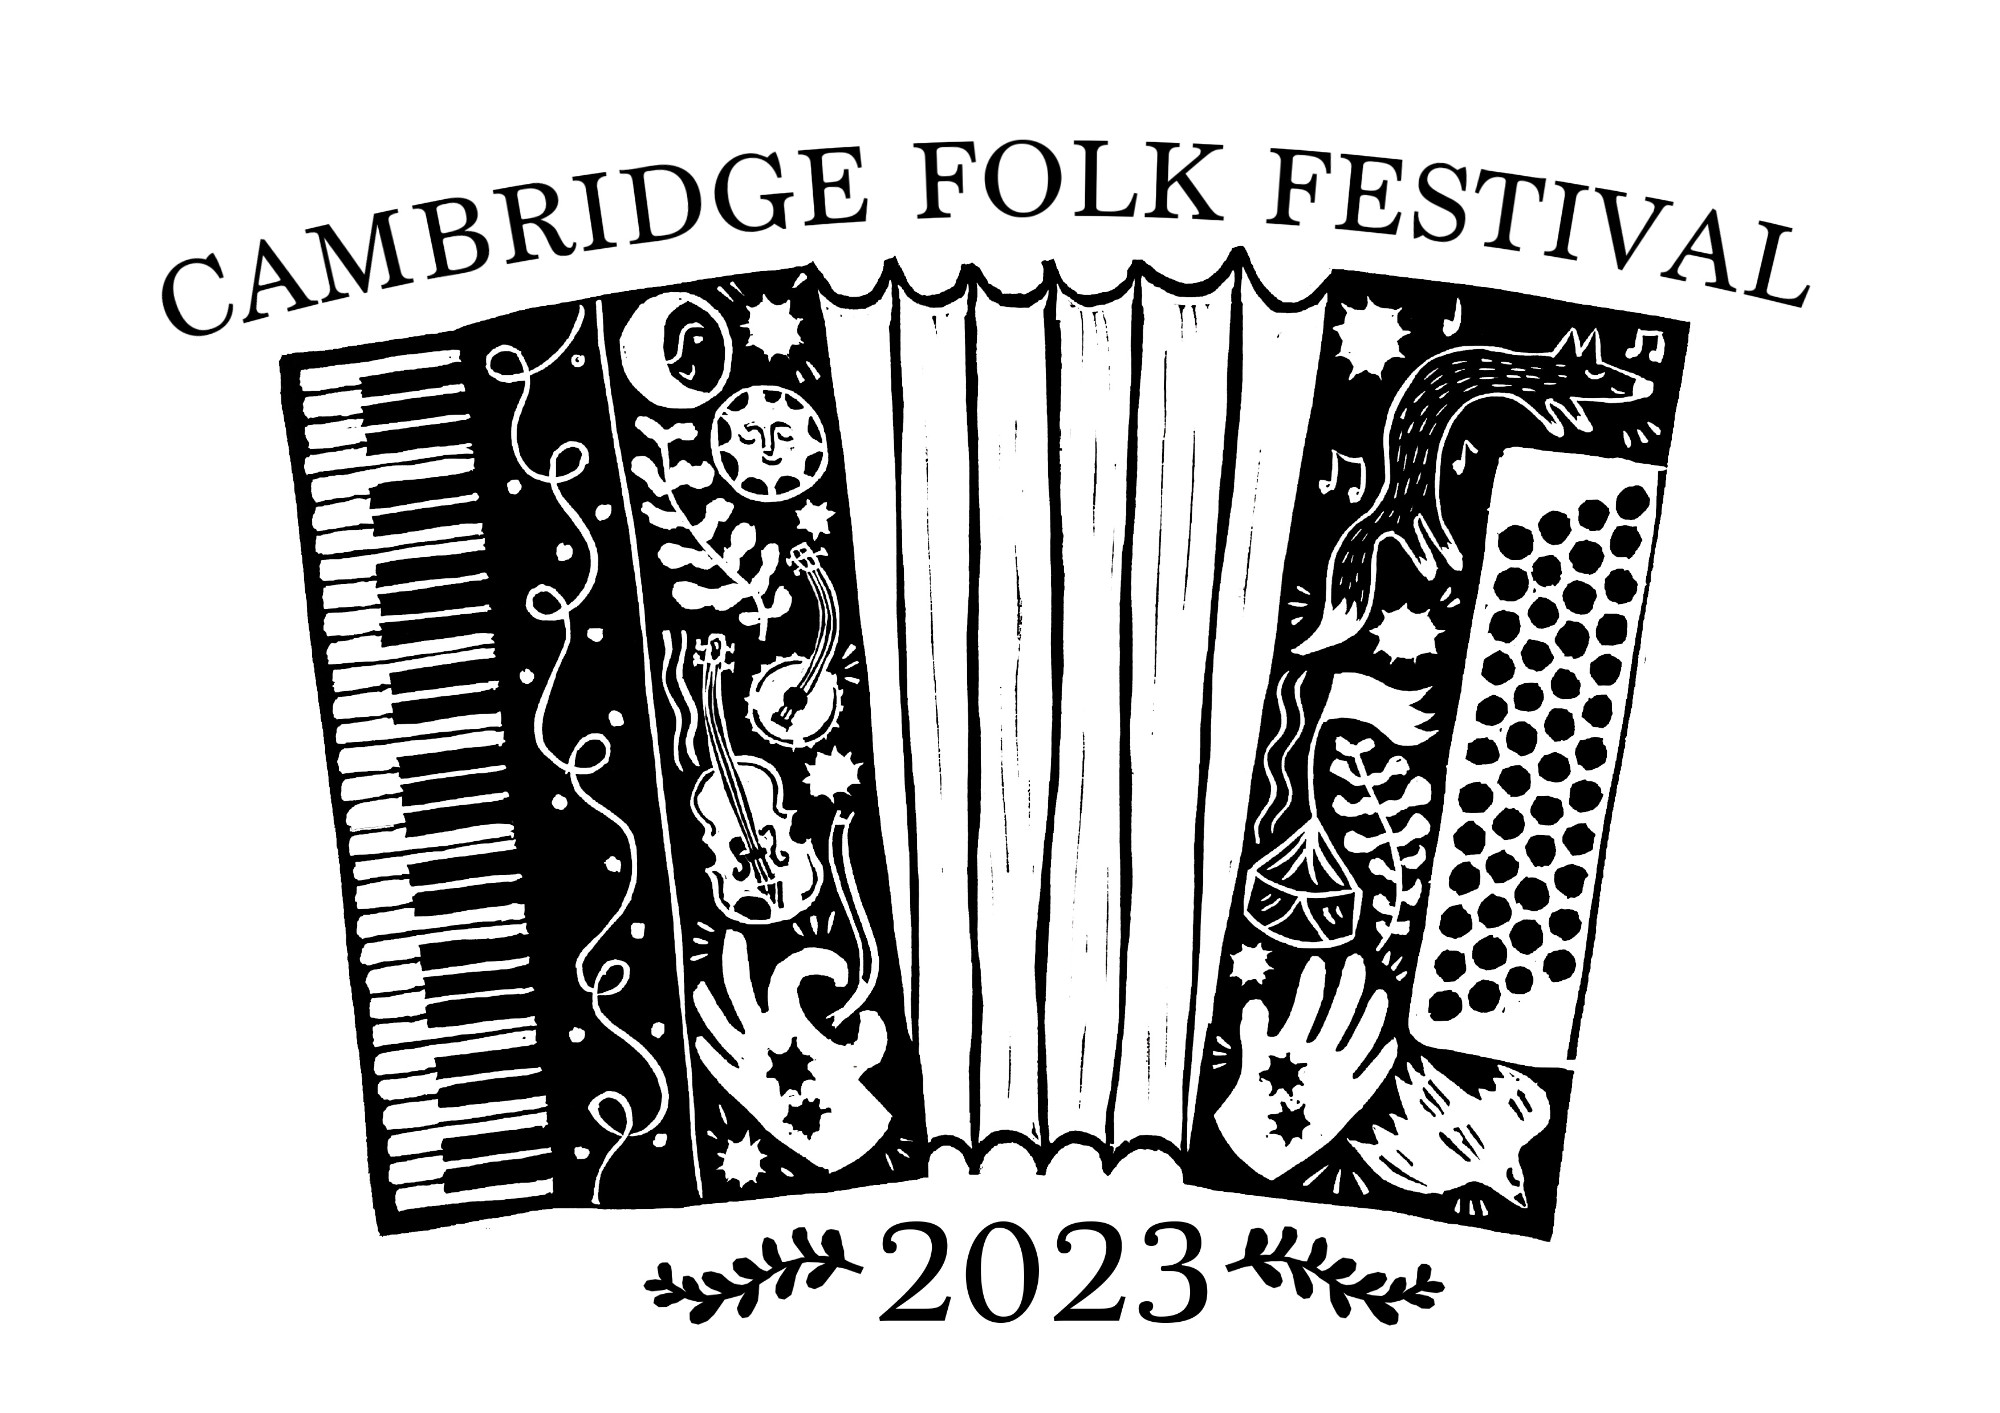 Cambridge Folk Festival T-shirt Competition Entry 2023. Linocut design for the annual t-shirt design competition held by Cambridge Folk Festival, which used to go to growing up.